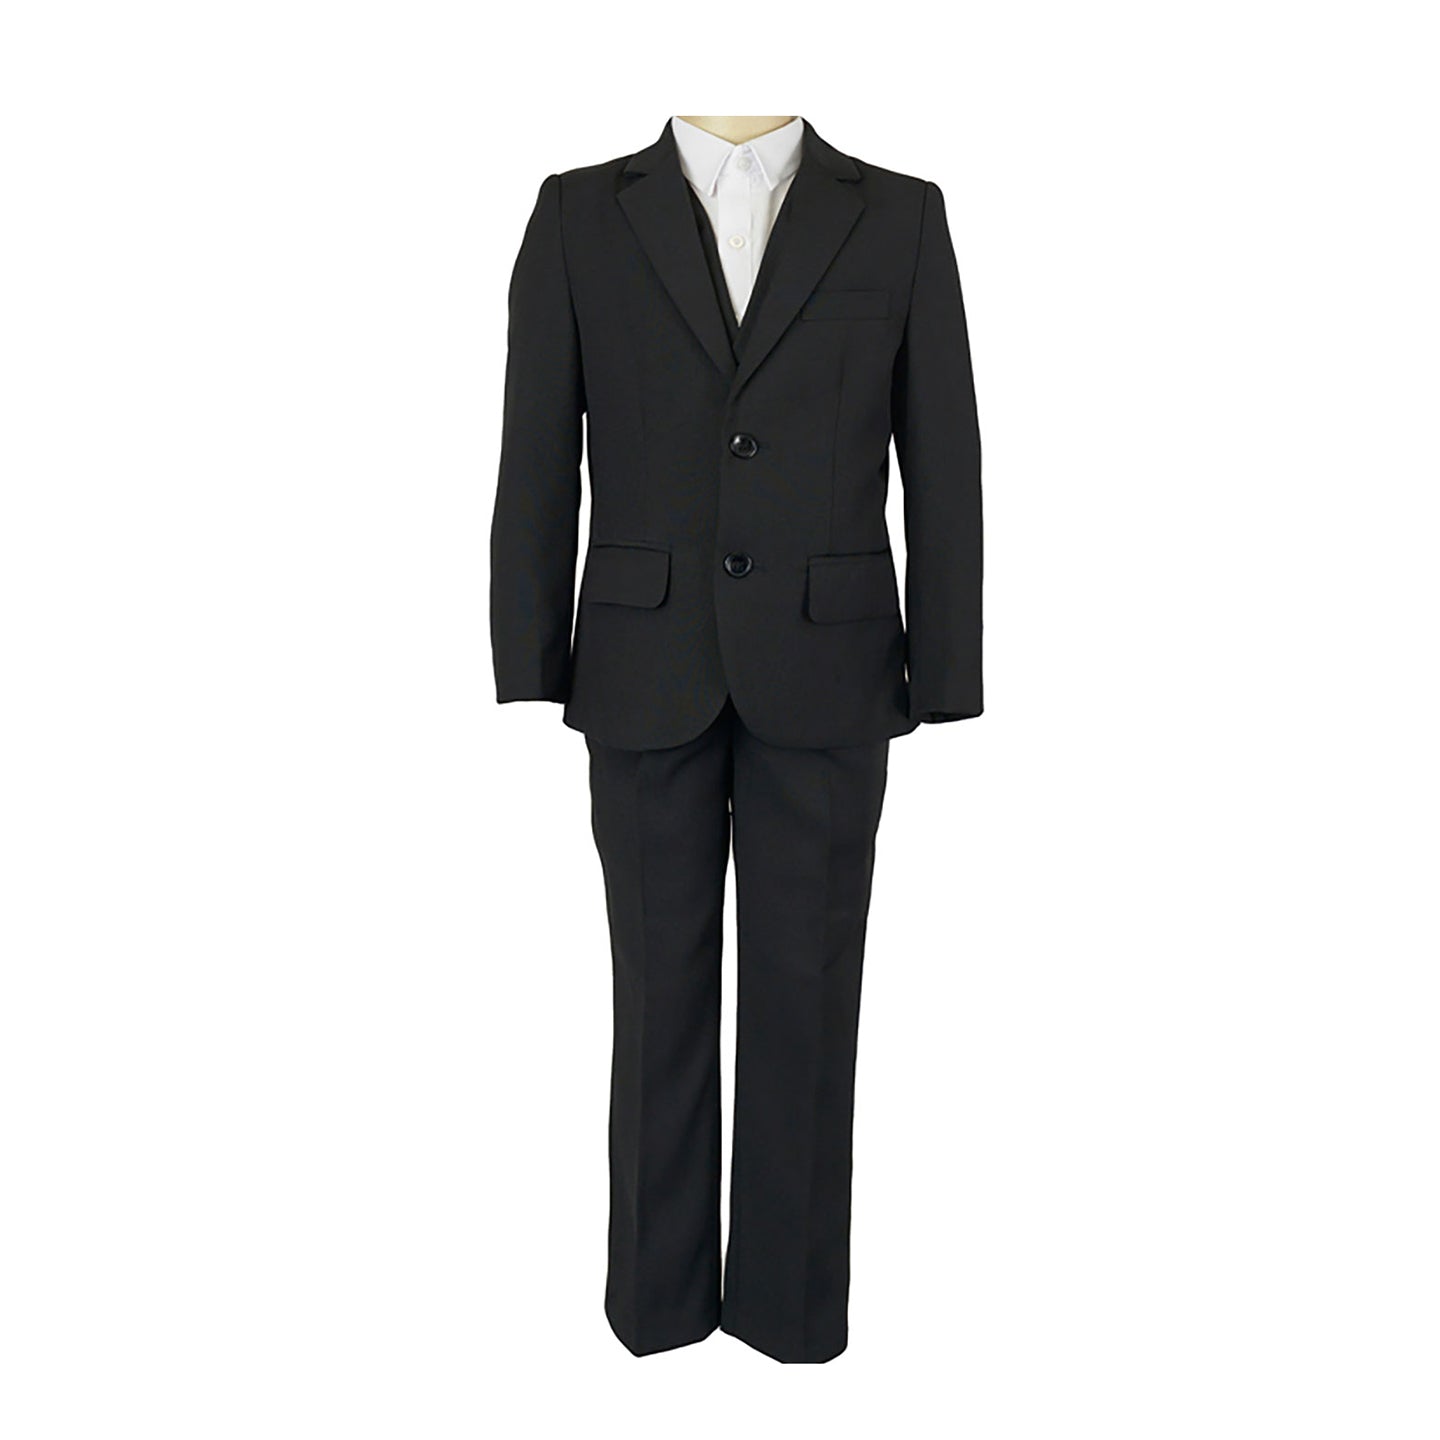 Boys' Formal Black Suit, 4 Piece Set (Size 6 Months to 7 Years)